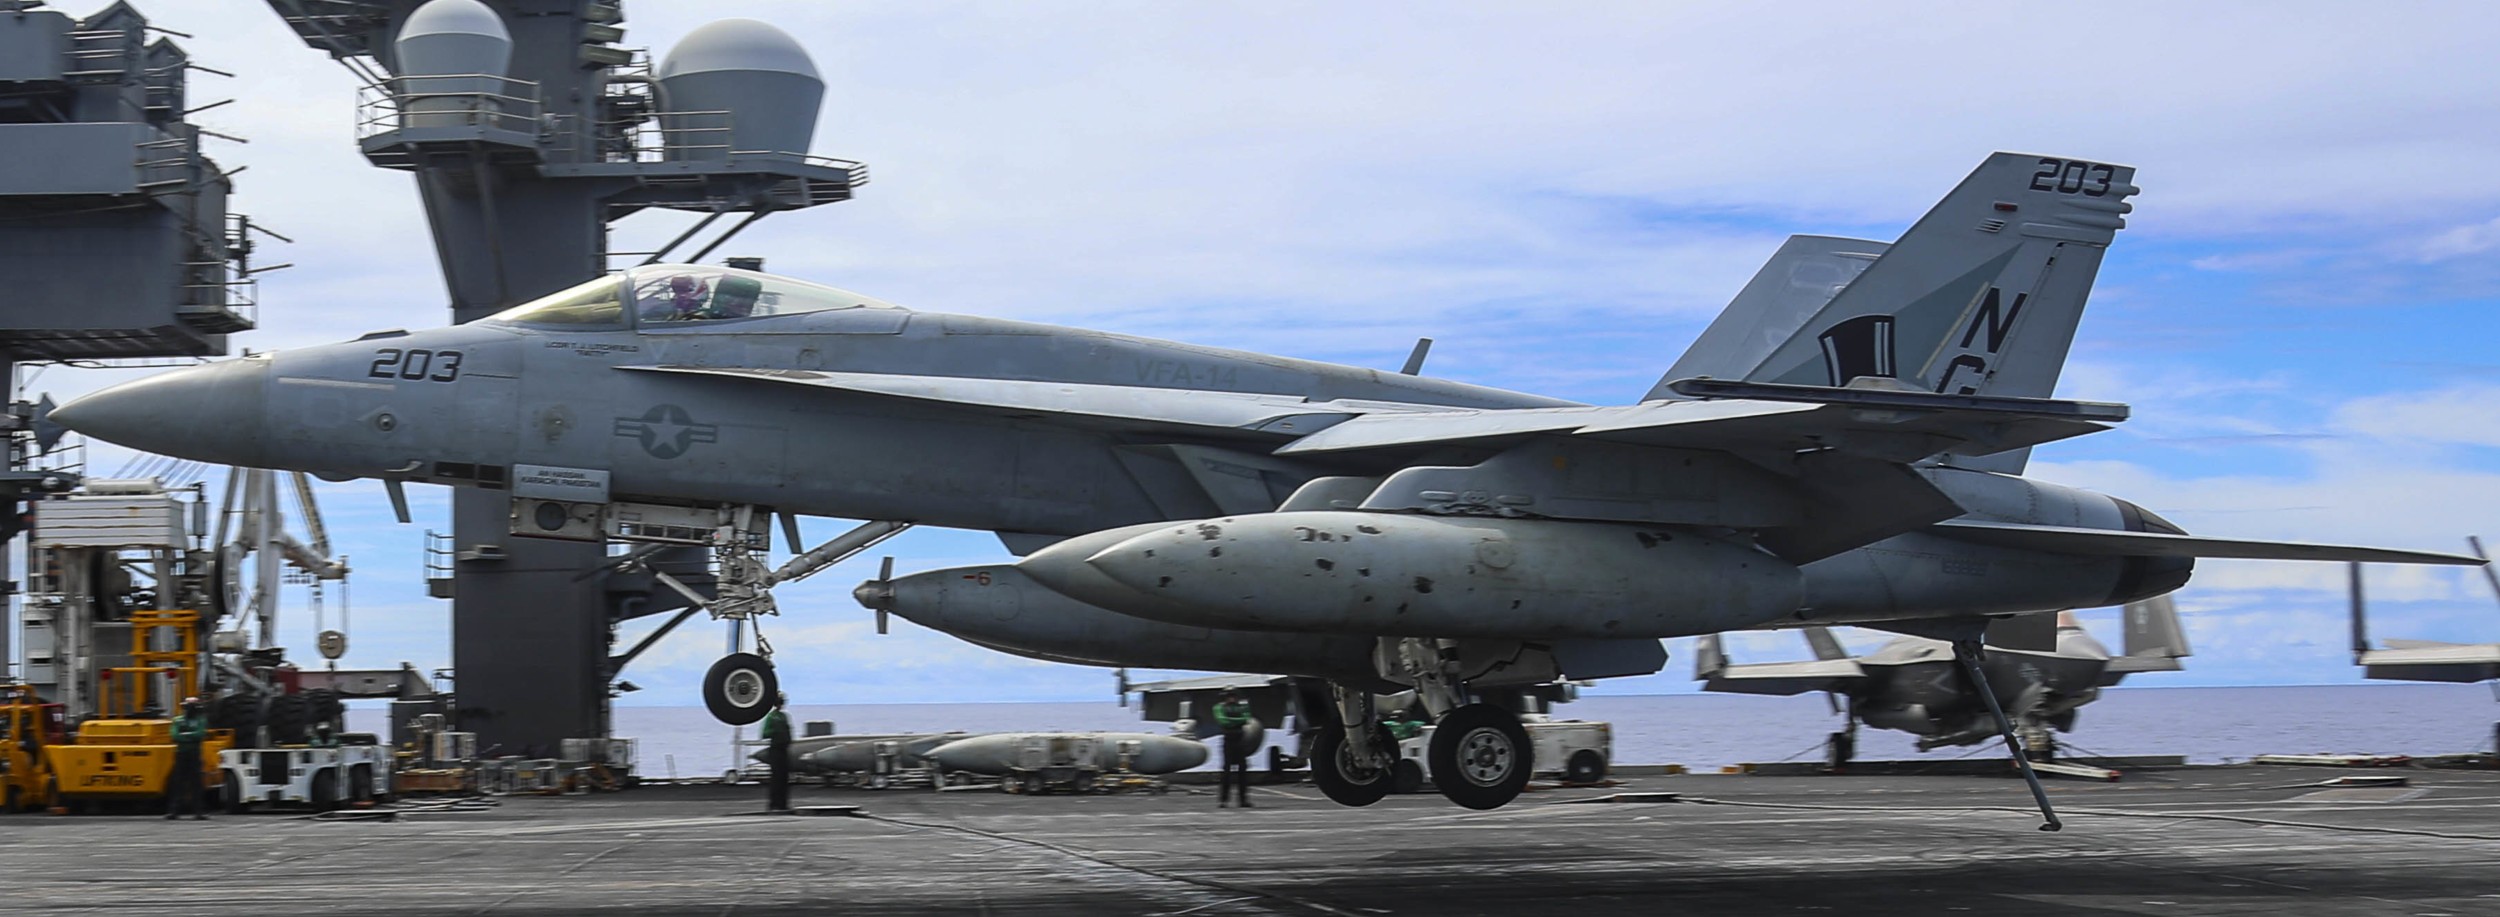 vfa-14 tophatters strike fighter squadron f/a-18e super hornet cvn-72 uss abraham lincoln cvw-9 us navy 71